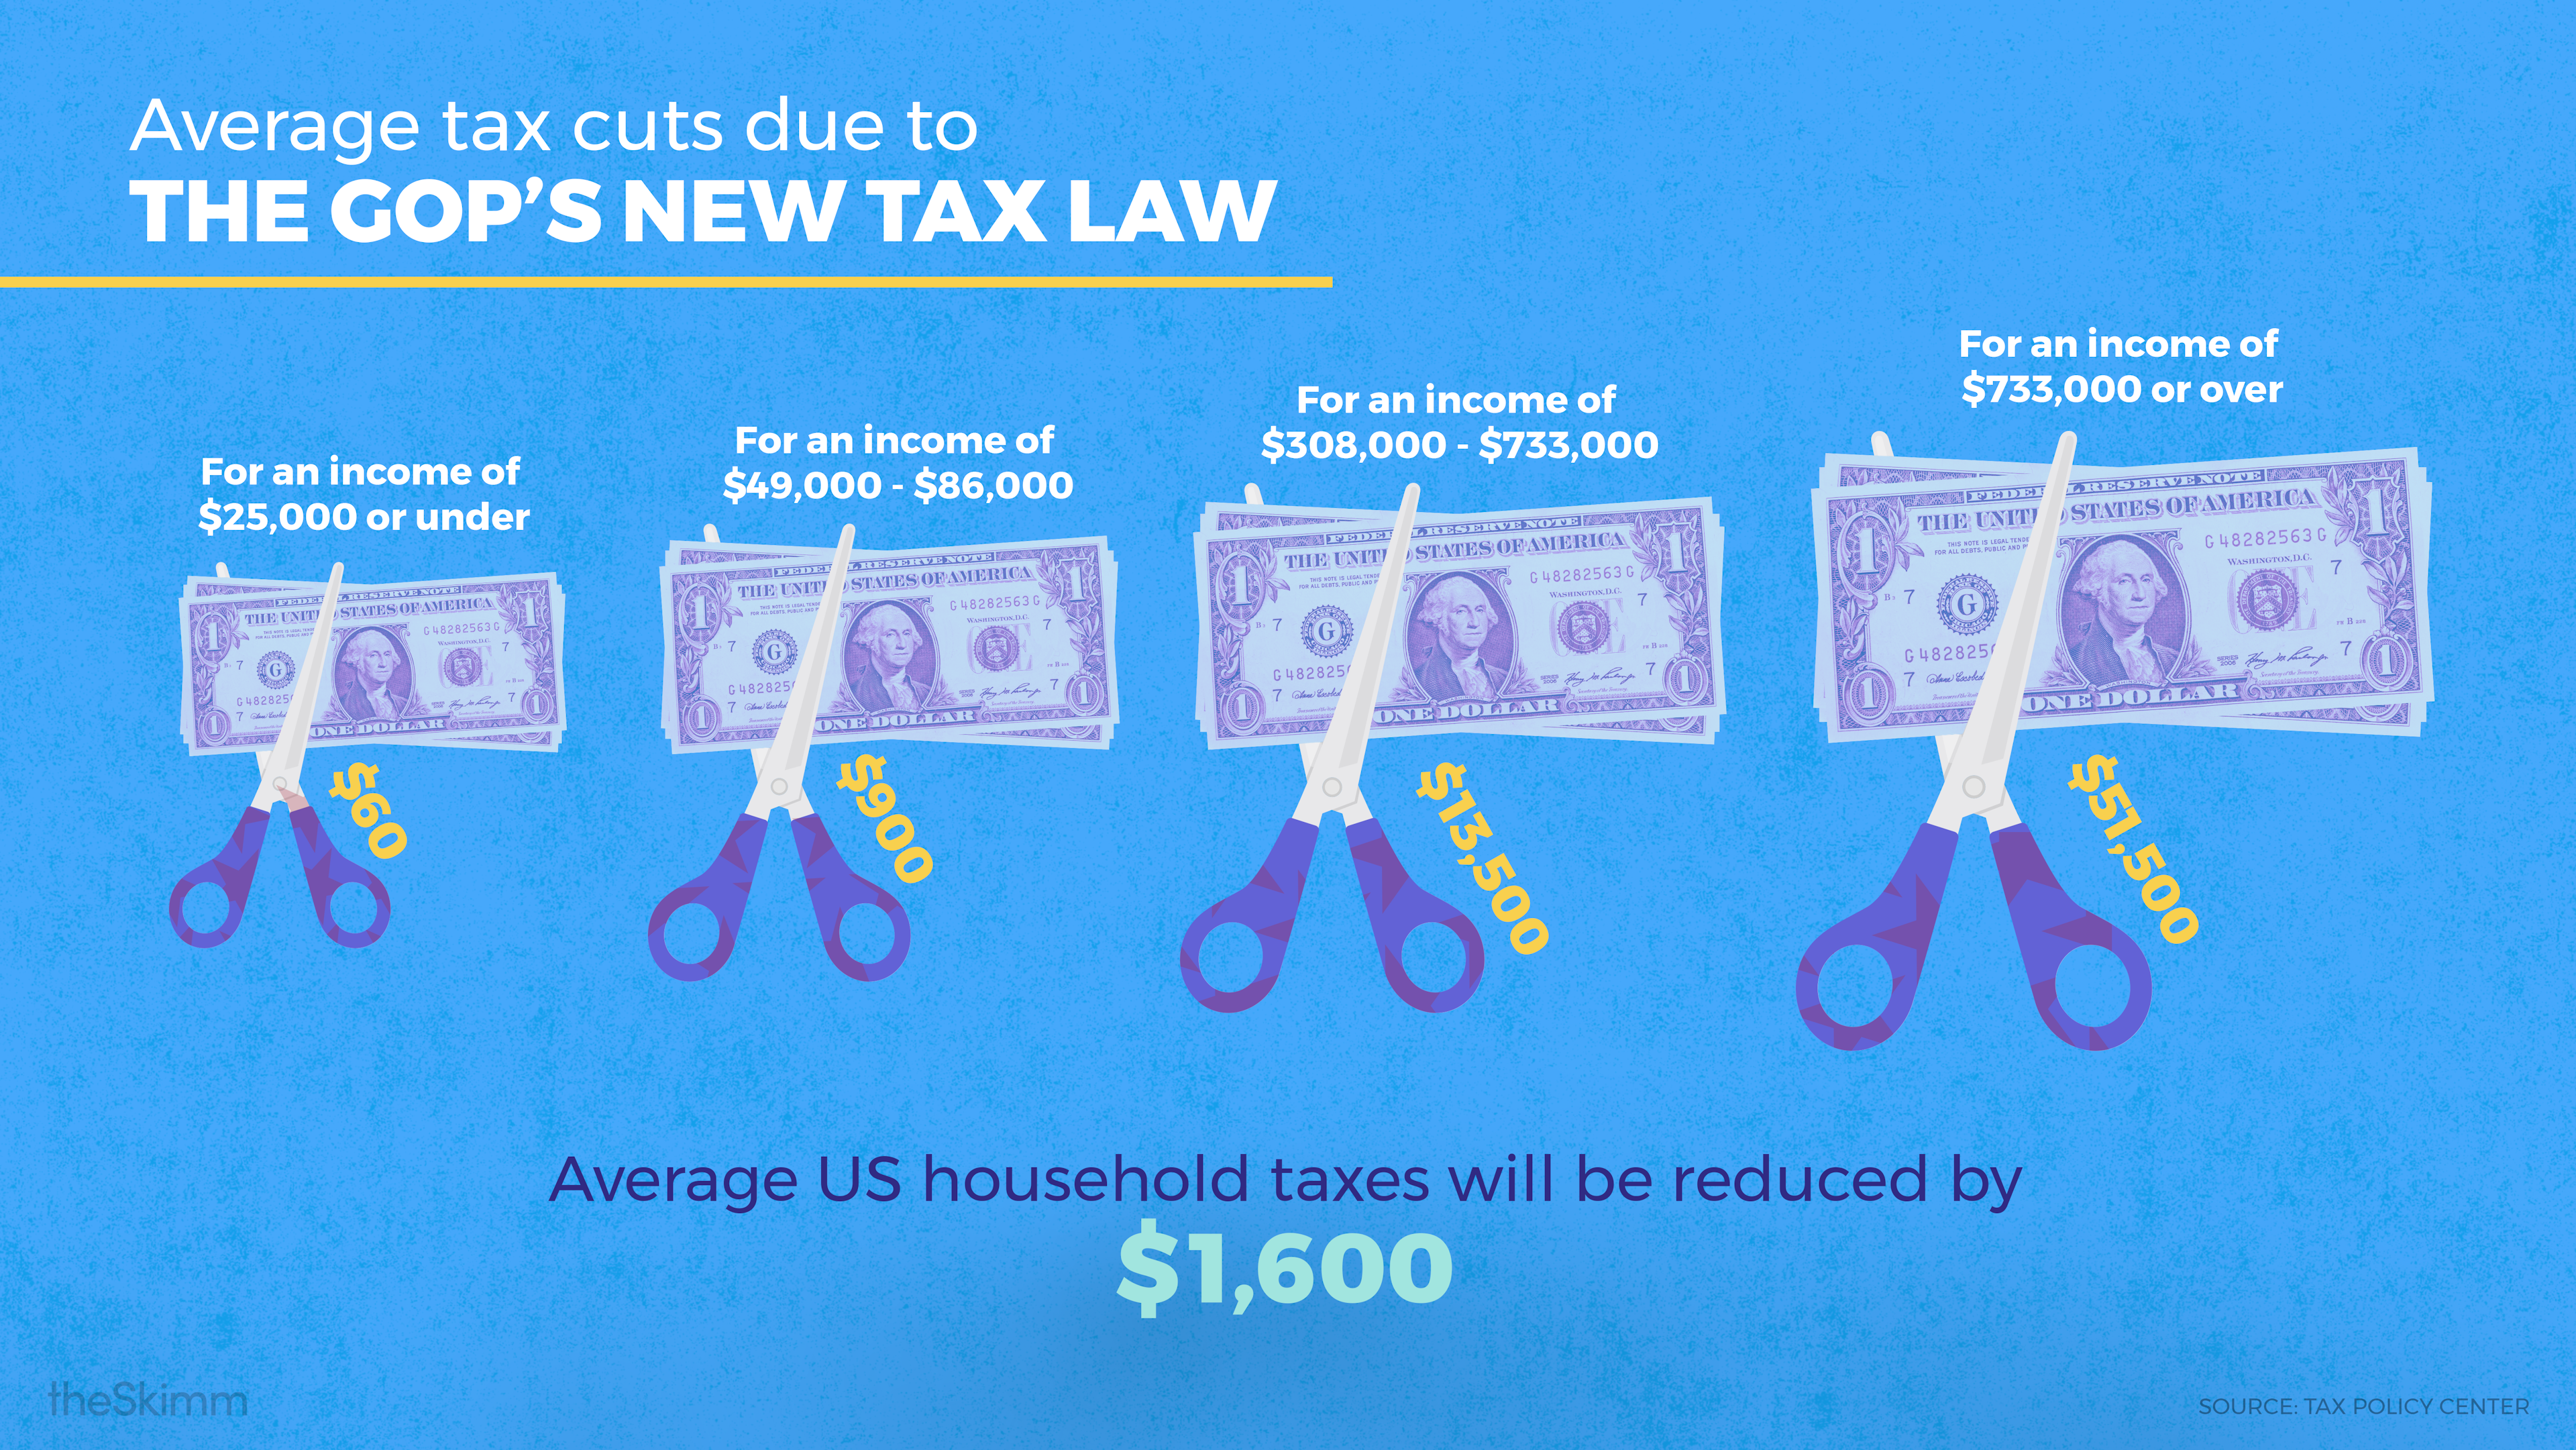 Average tax cuts due to the GOP's new tax law. Average US household taxes will be reduced by $1,600.